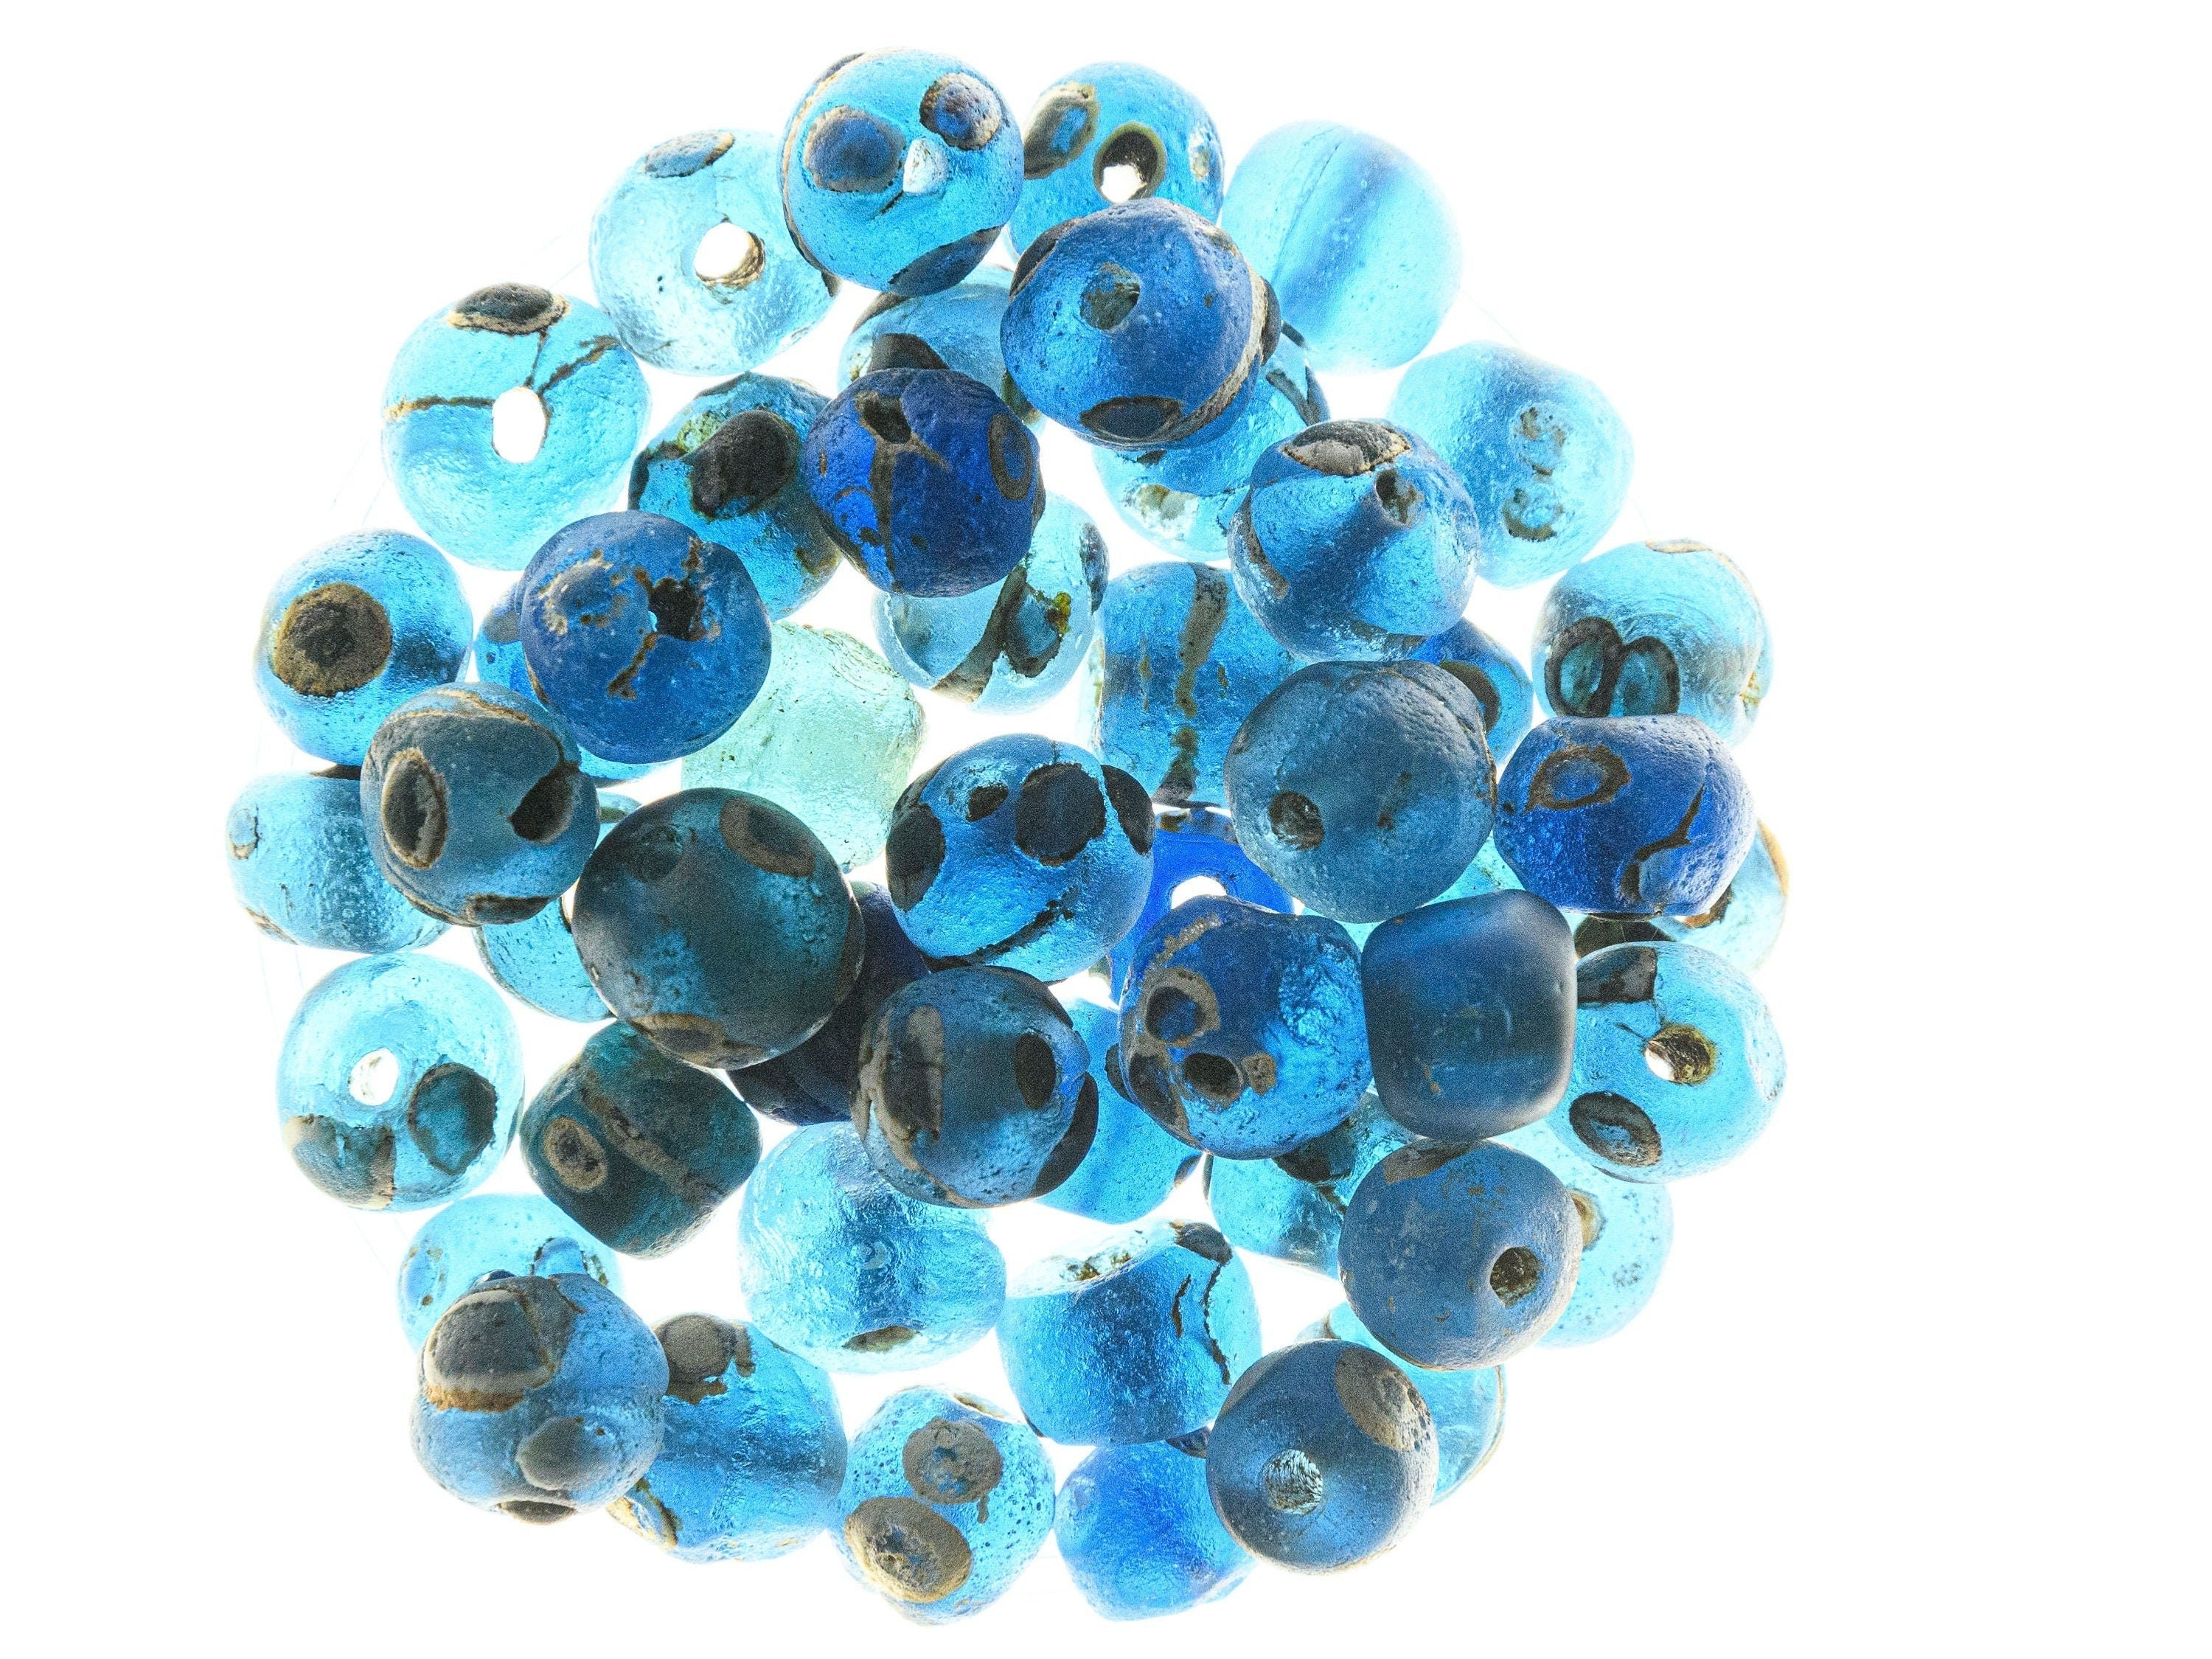 Short Strand of 10 Small Ancient Islamic Glass Evil Eye Beads from